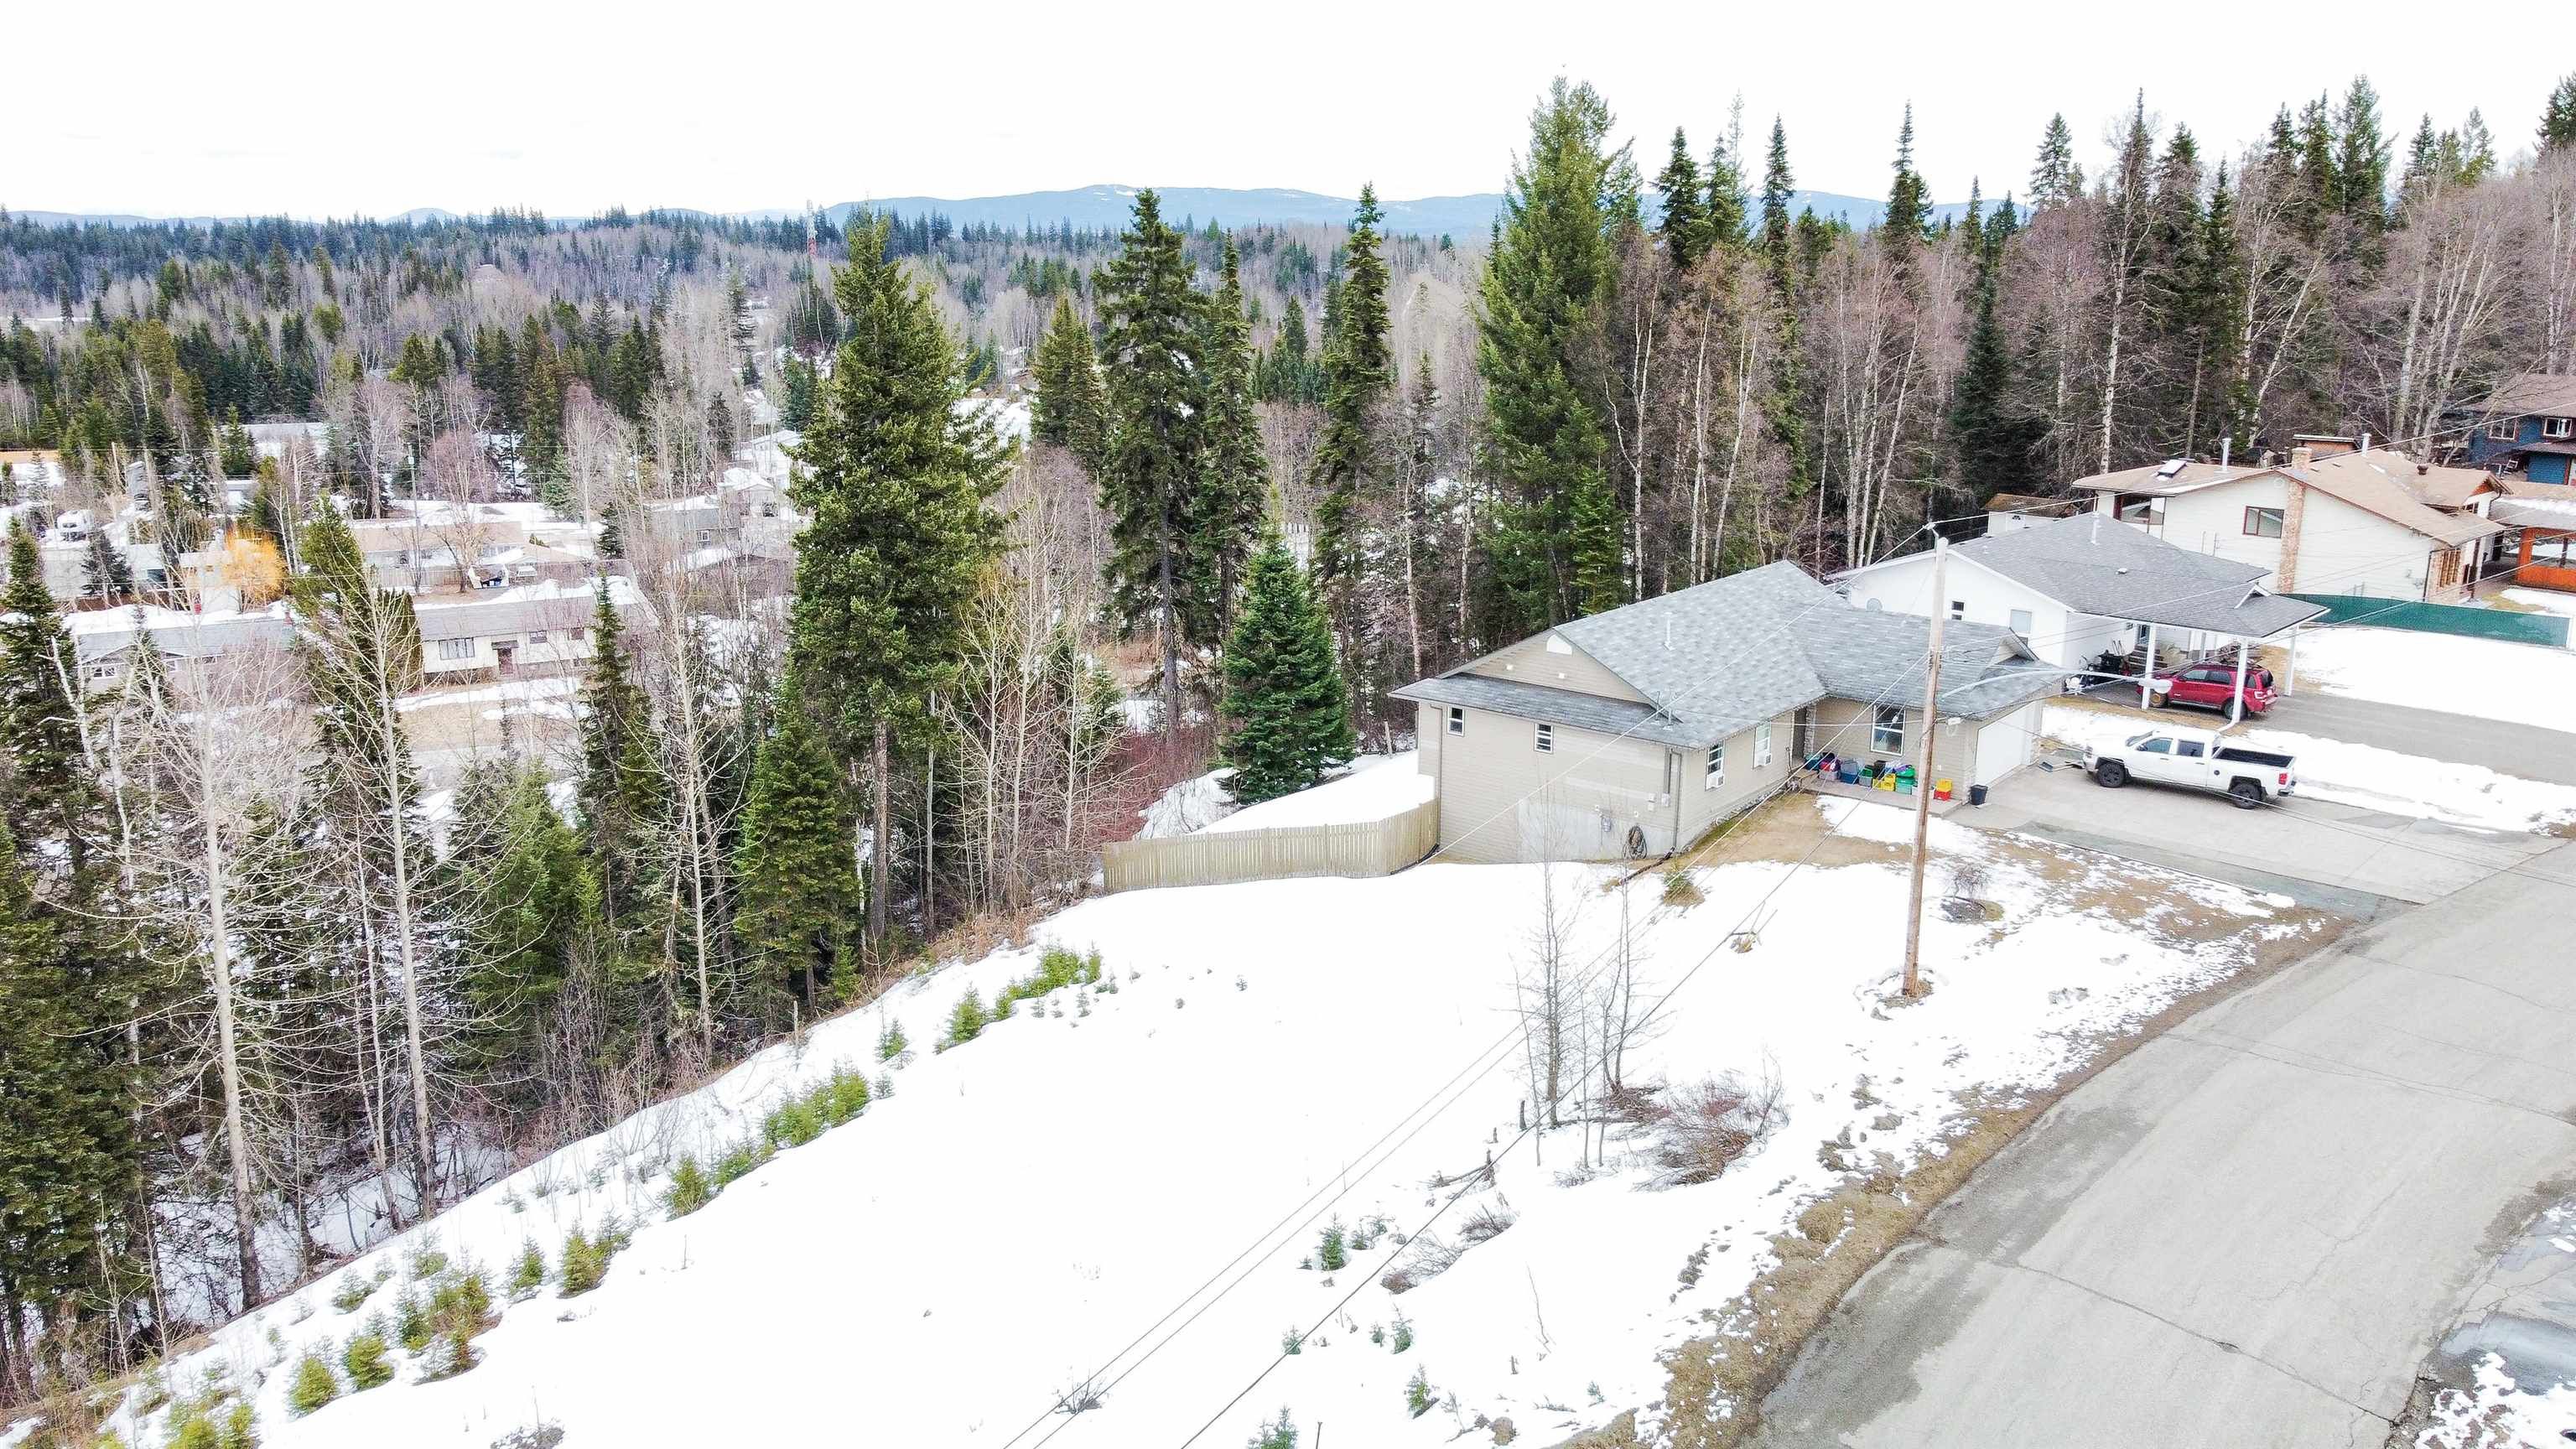 Main Photo: 2890 INGALA Drive in Prince George: Ingala Land for sale (PG City North)  : MLS®# R2674815